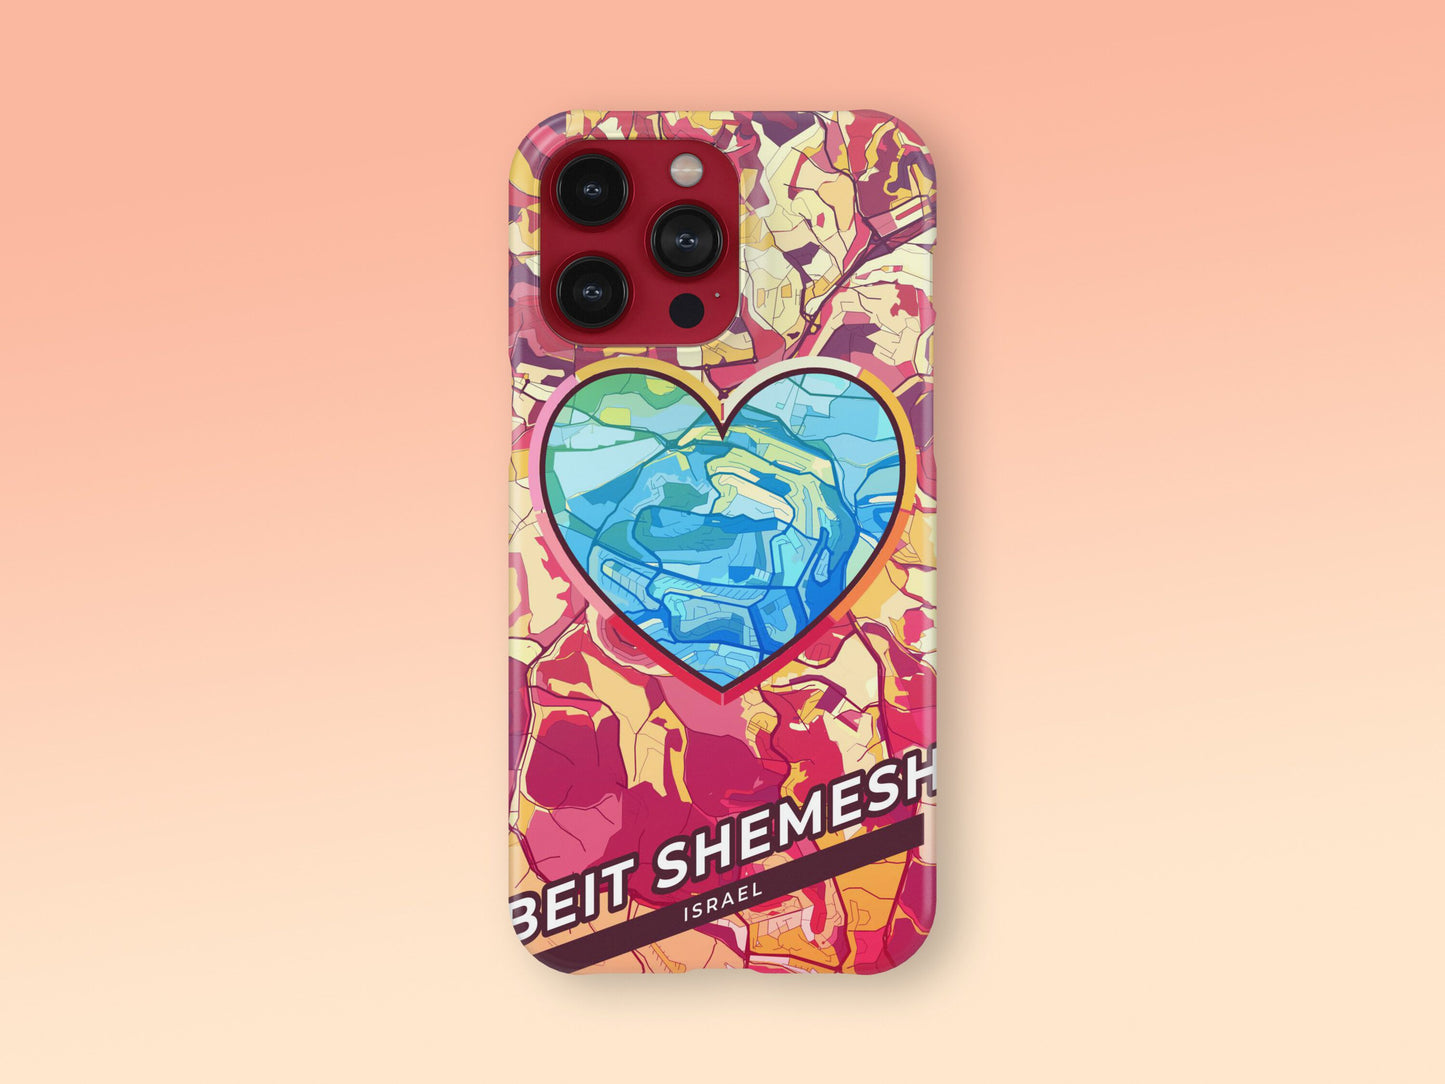 Beit Shemesh Israel slim phone case with colorful icon. Birthday, wedding or housewarming gift. Couple match cases. 2